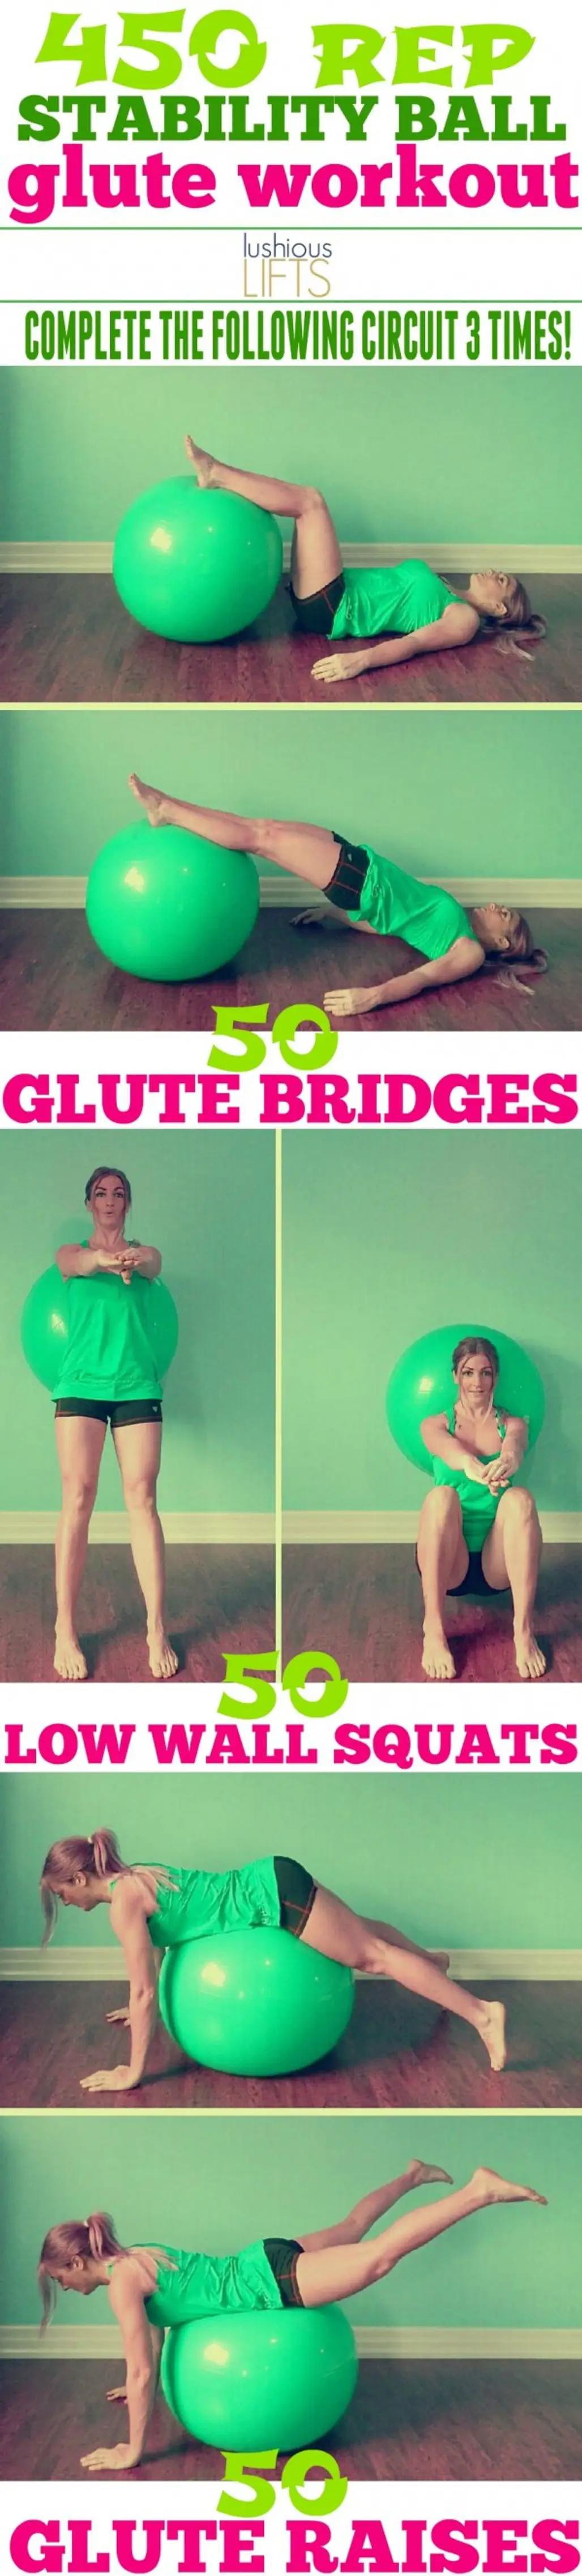 450 Rep Stability Ball Glute Workout